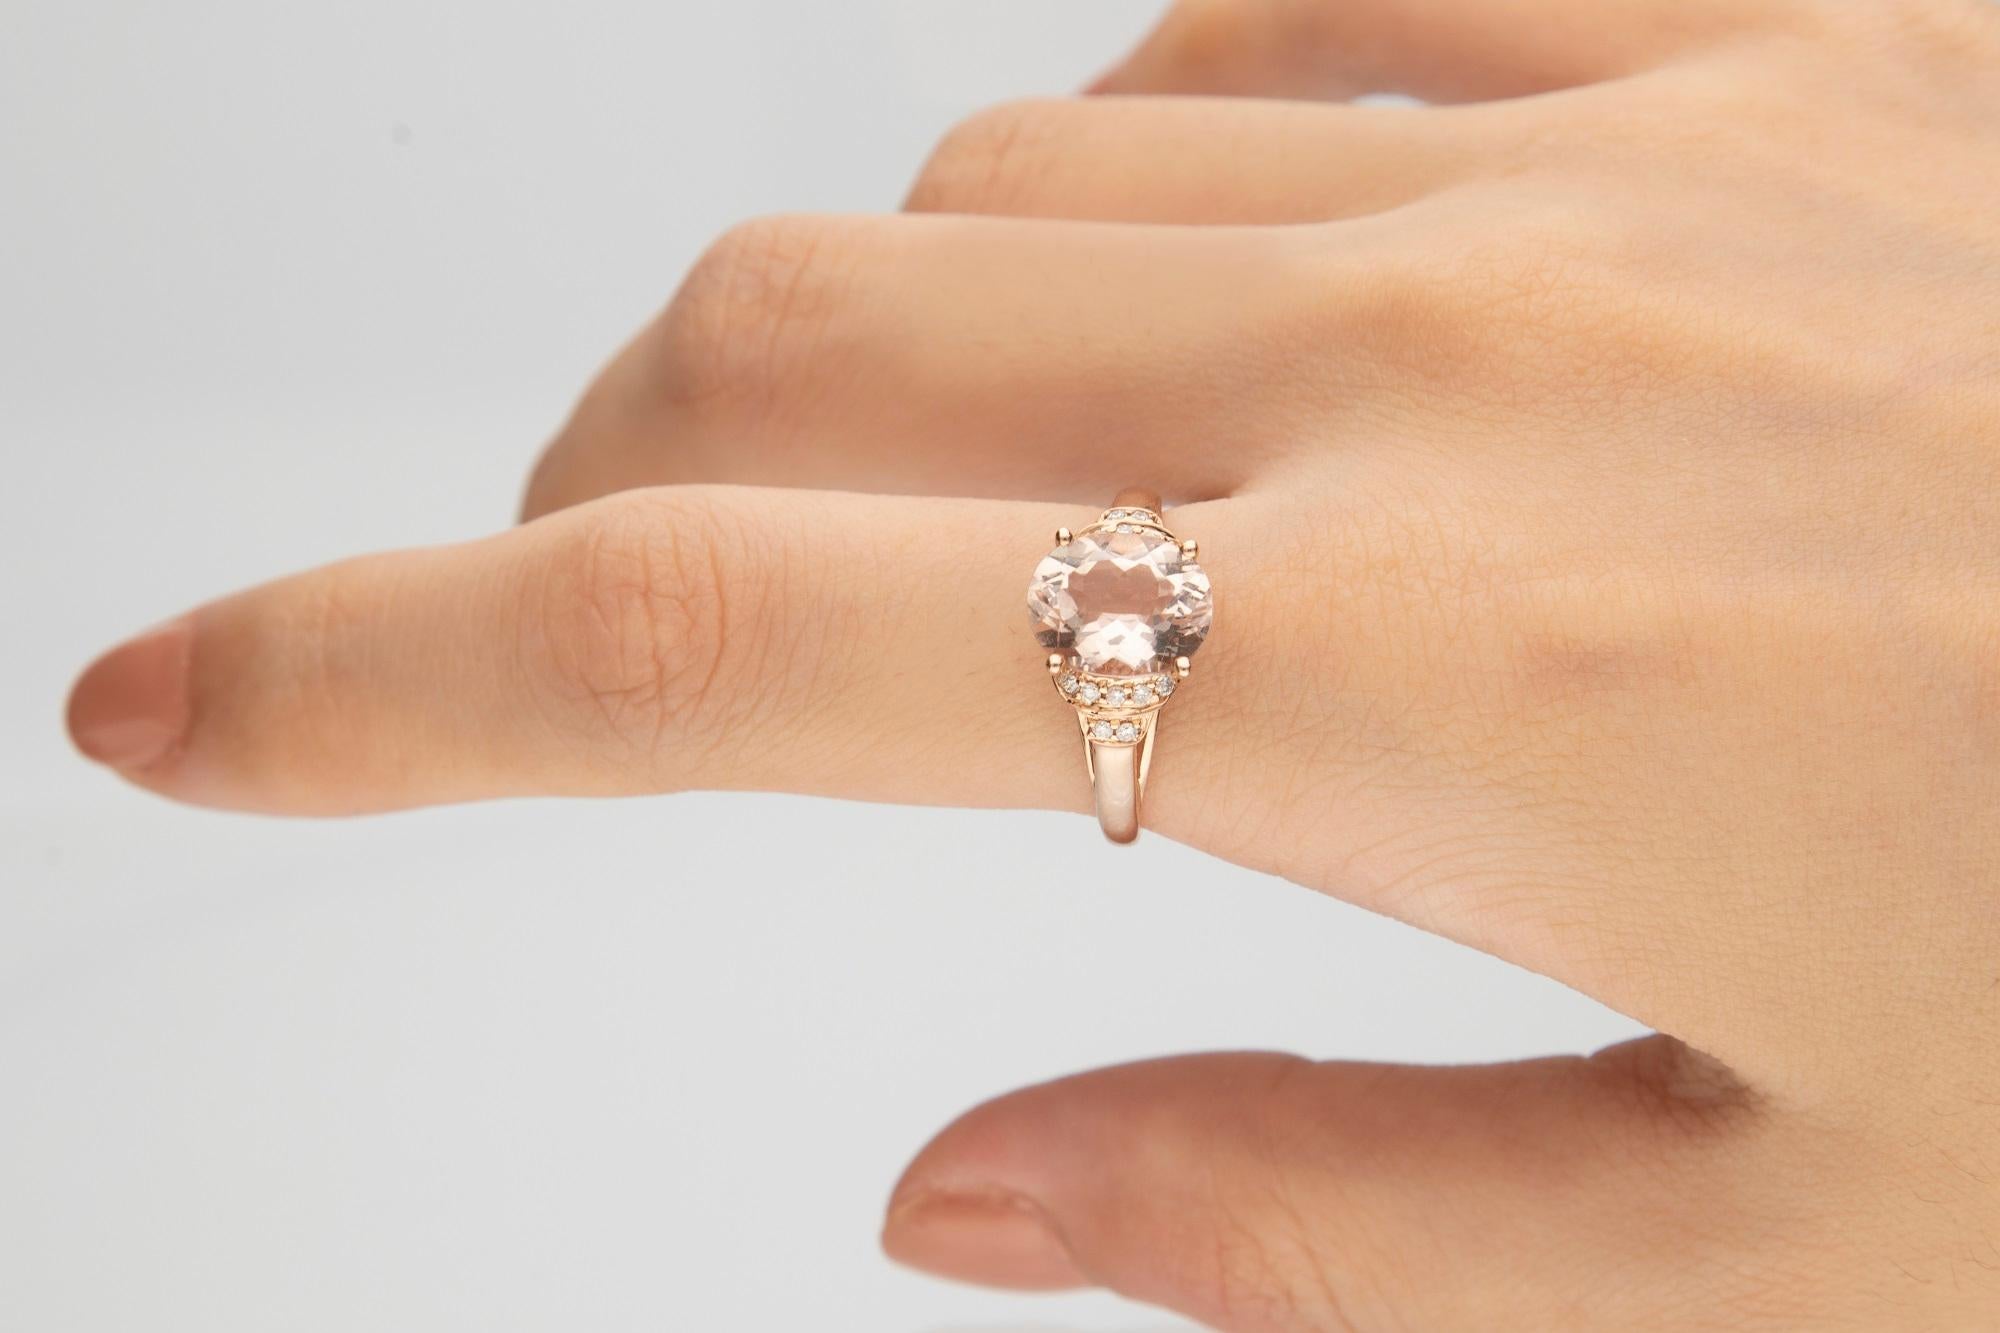 Tickle her pink with this oval-cut Genuine morganite and Gin& Grace Natural diamond ring. Offering a band crafted from 10k rose gold with a high-polish finish, the ring displays an impressive oval-cut Genuine morganite surrounded by 16 round-cut